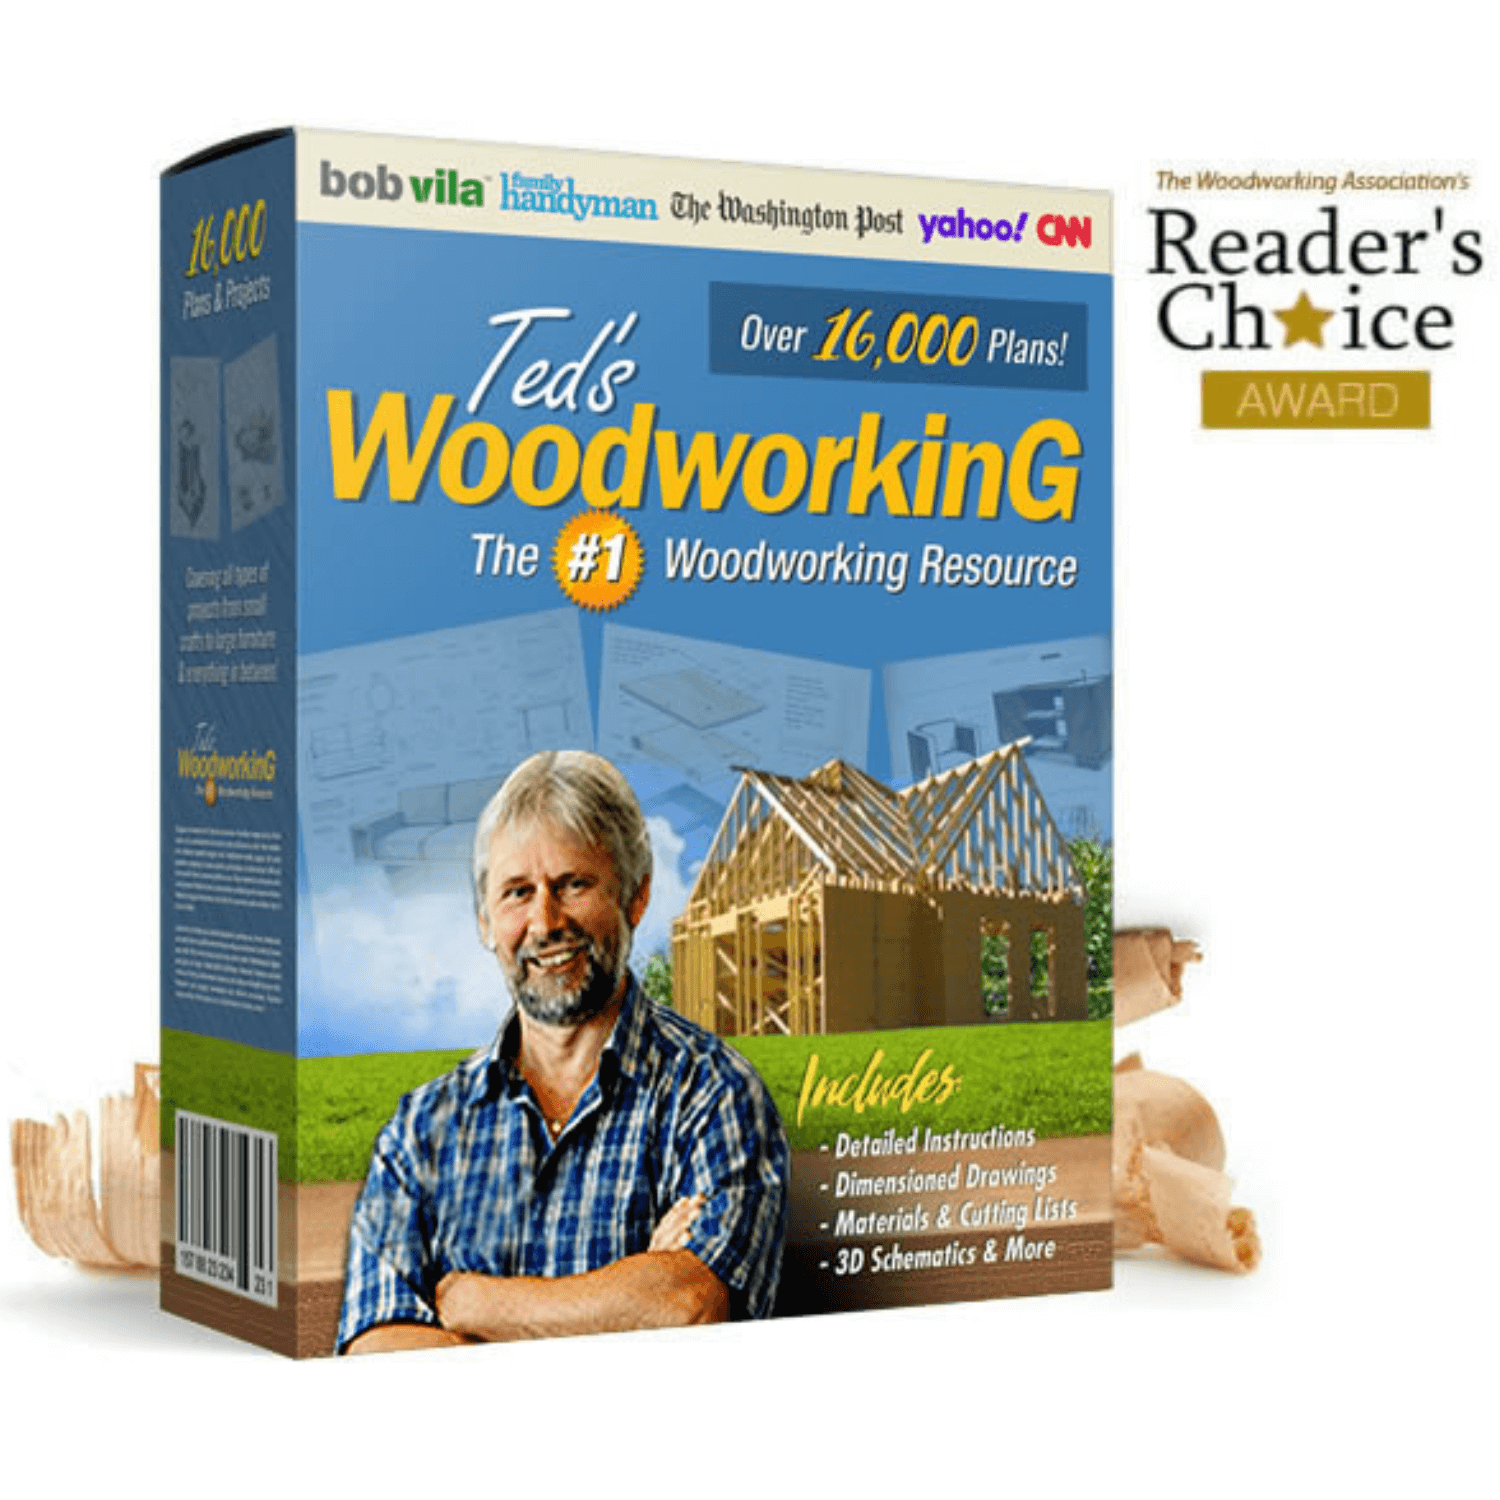 Ted's Woodworking | The World's Largest Collection of 16,000 Woodworking Plans